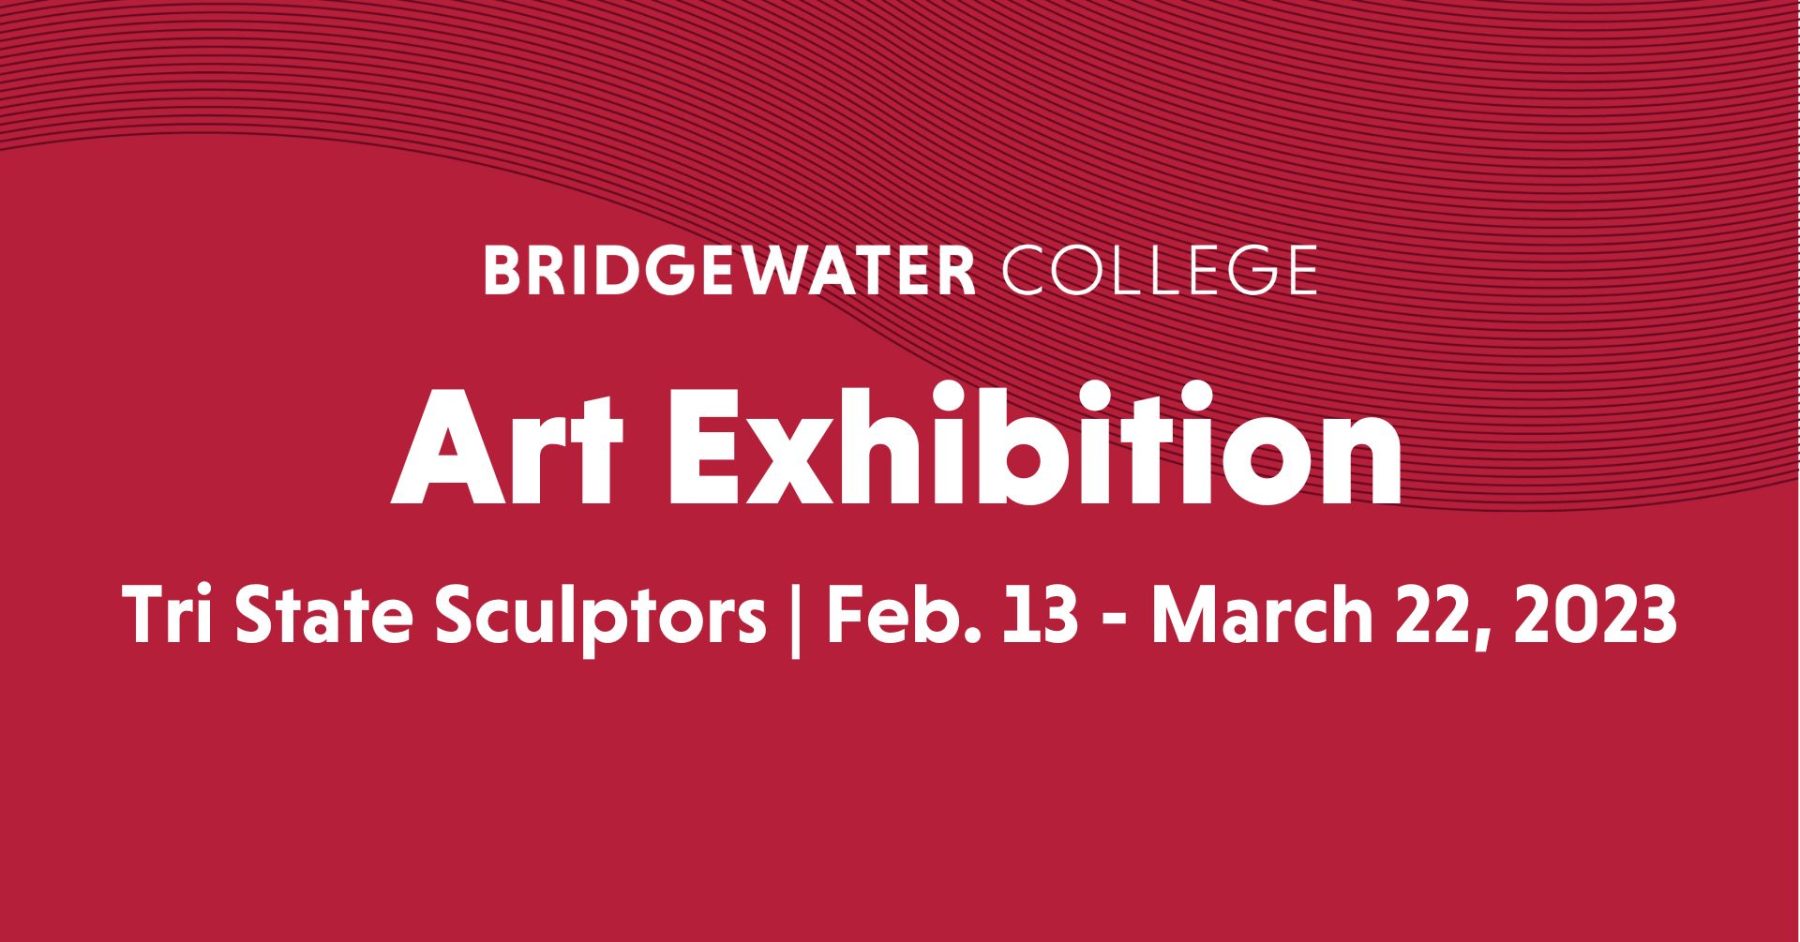 a red graphic that reads: Bridgewater College Art Exhibition Tri State Sculptors Feb. 13 - March 22